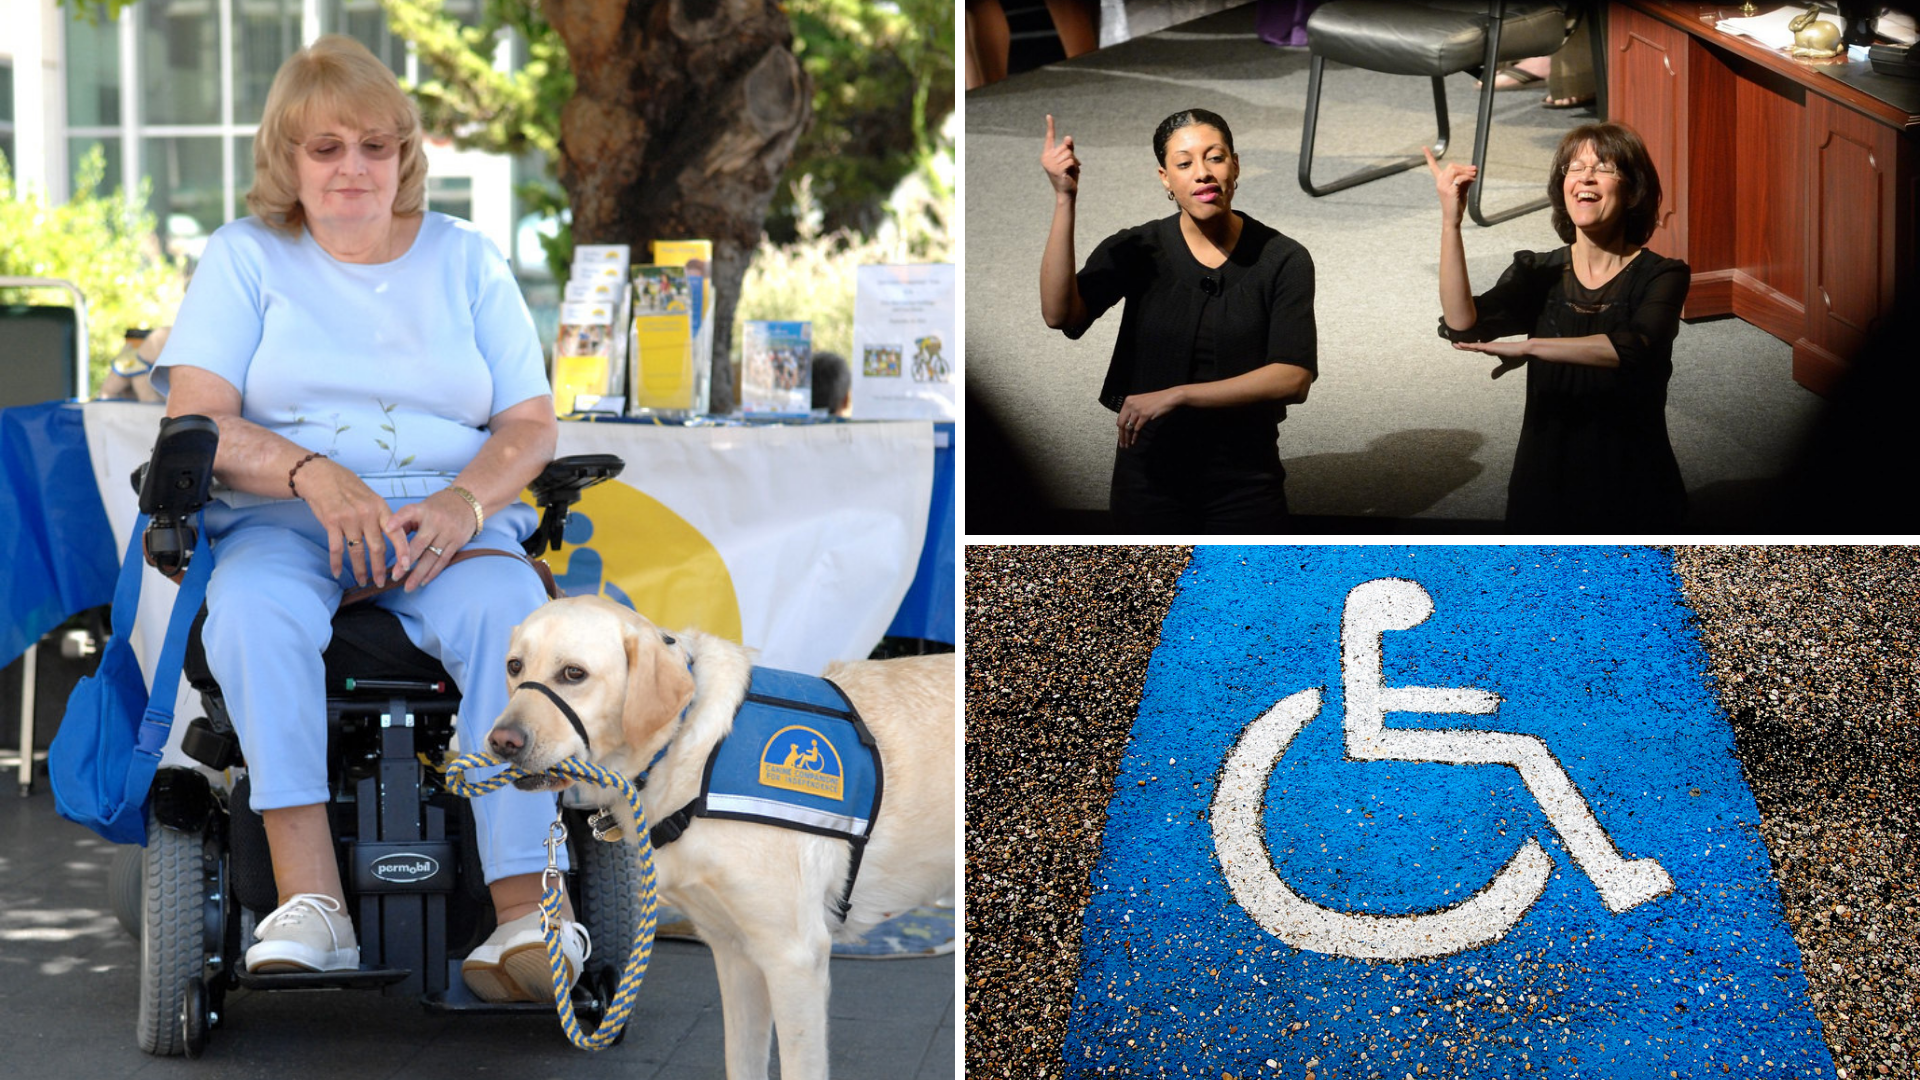 .woman in a wheelchair with a guide dog, two sign language interpreters signing, and a disability parking space